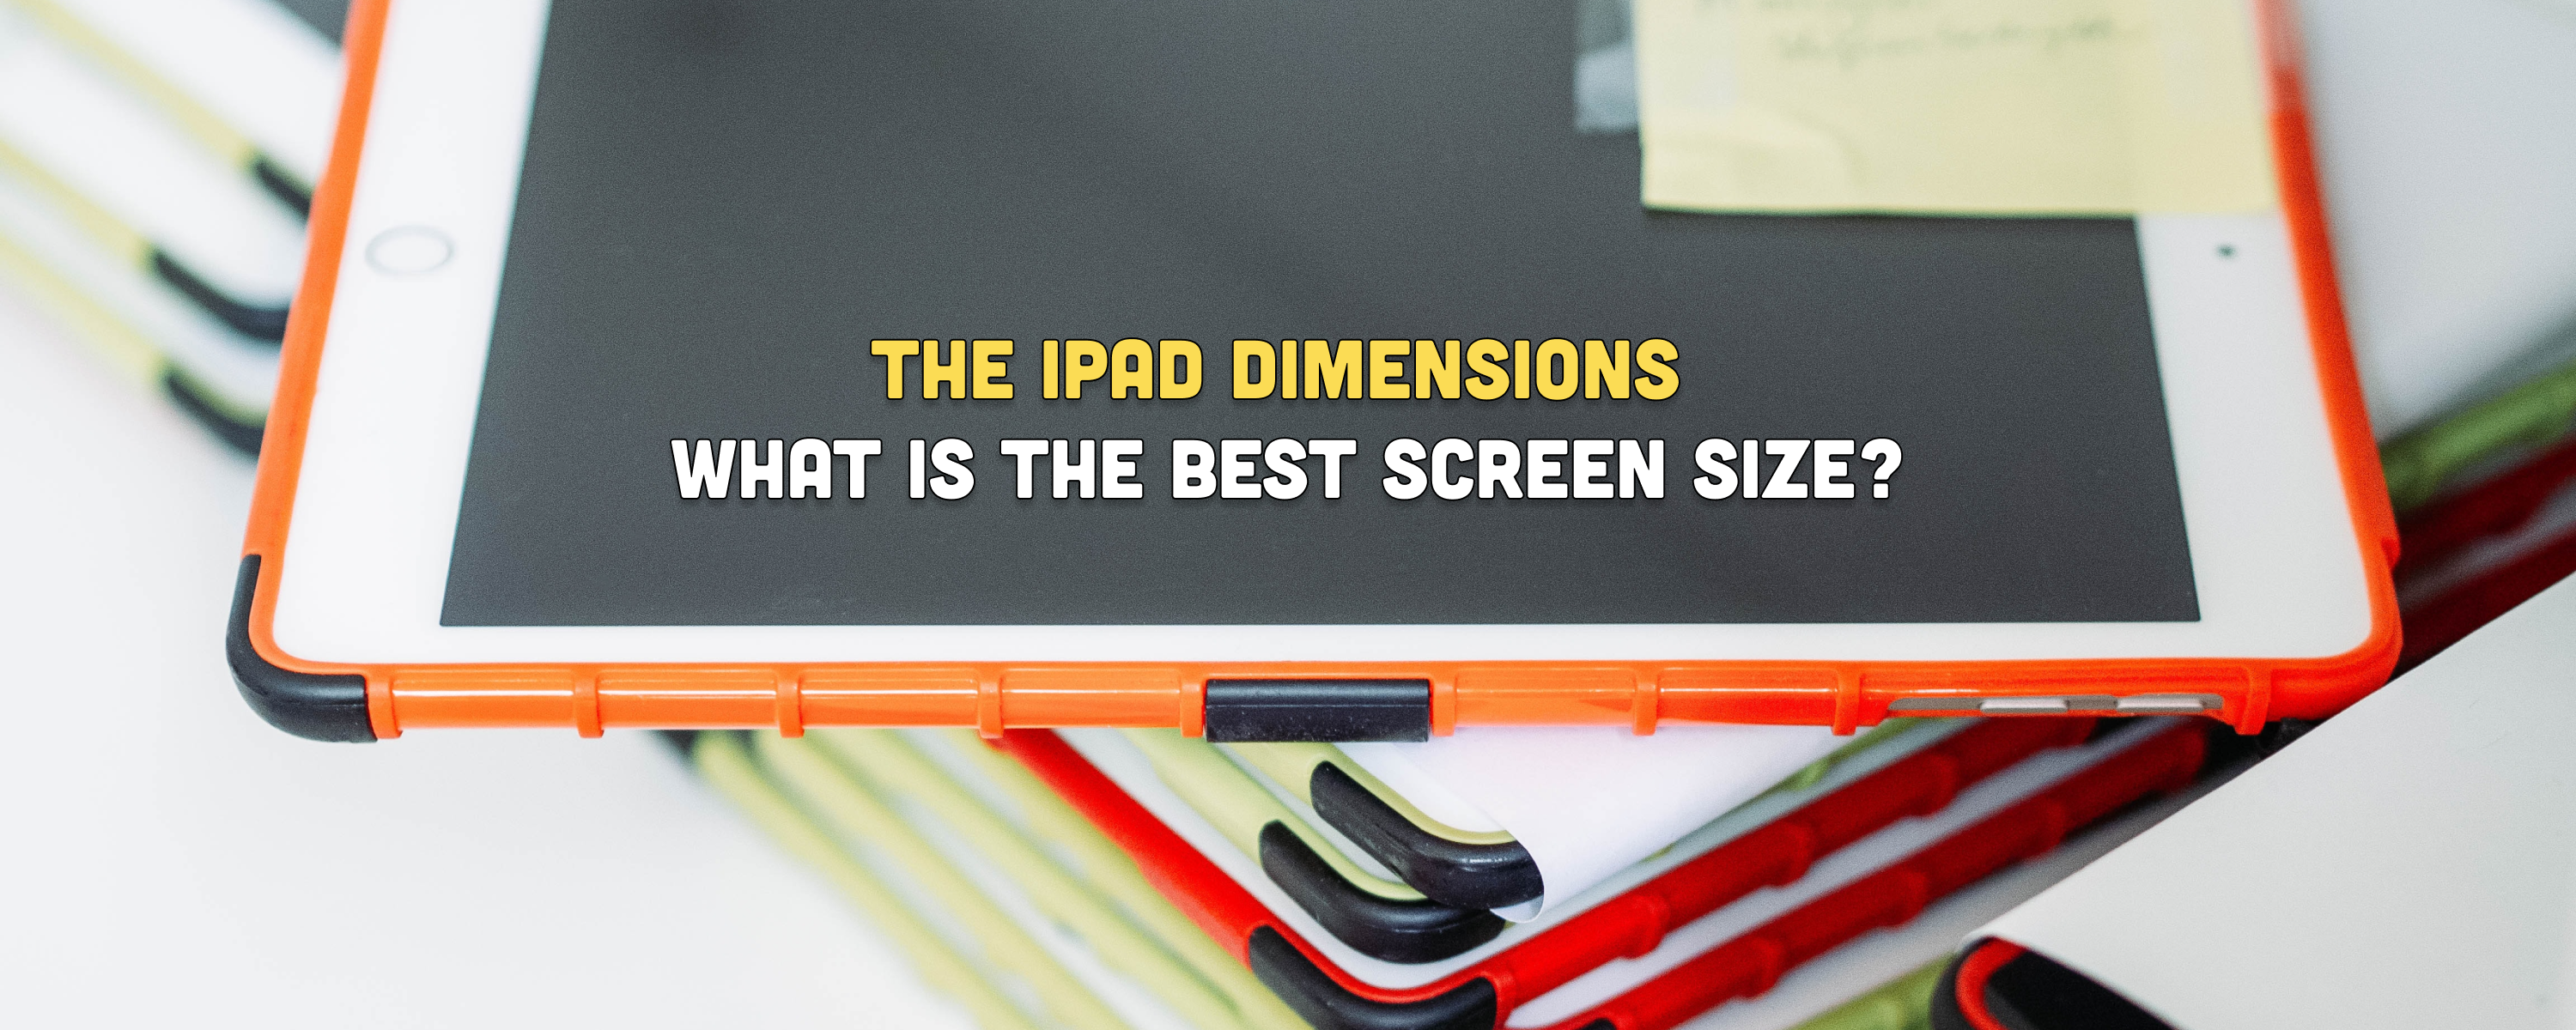 The iPad Dimensions: What Is the Best Screen Size? (Updated for the iPad Pro 6)